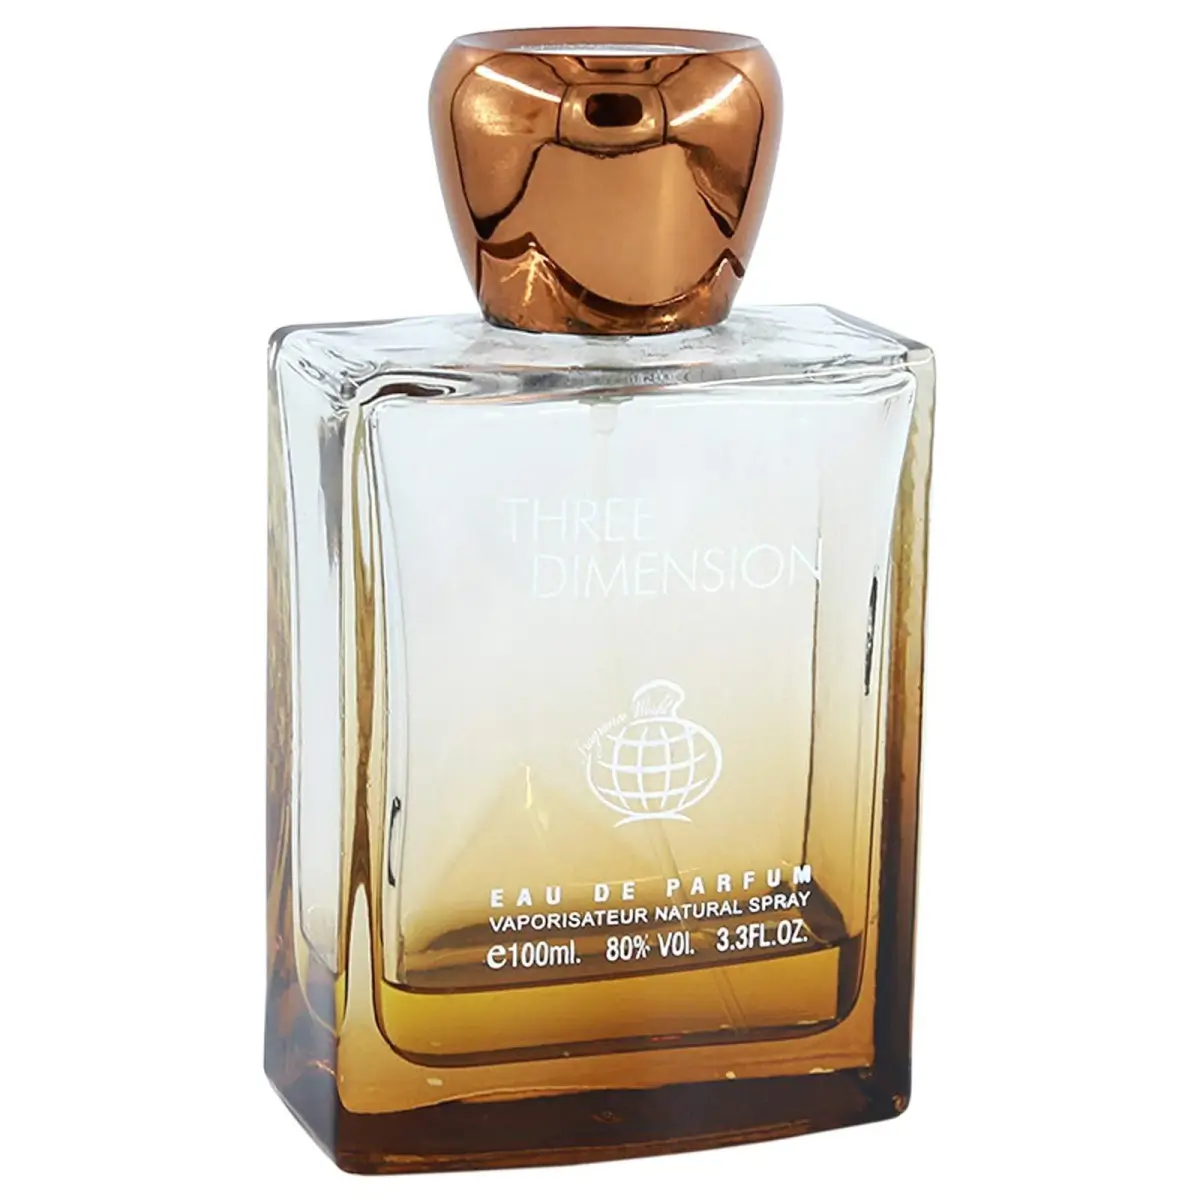 Three Dimensions Perfume  / Eau De Parfum 100Ml By Fragrance World (Inspired By Terre D'Hermes By Hermes)